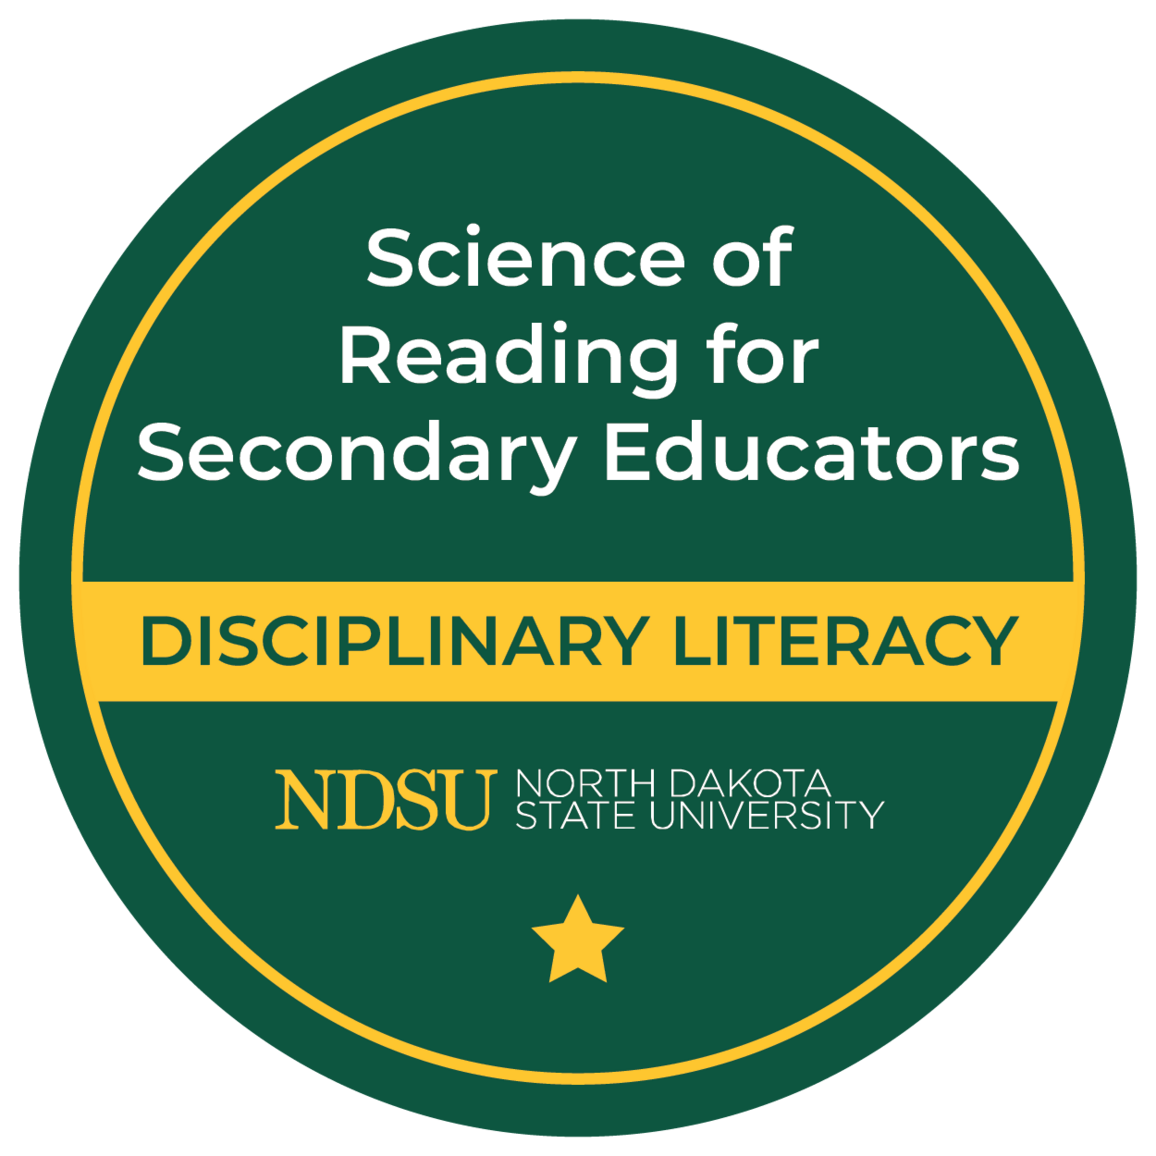 Science of Reading for Secondary Educators badge